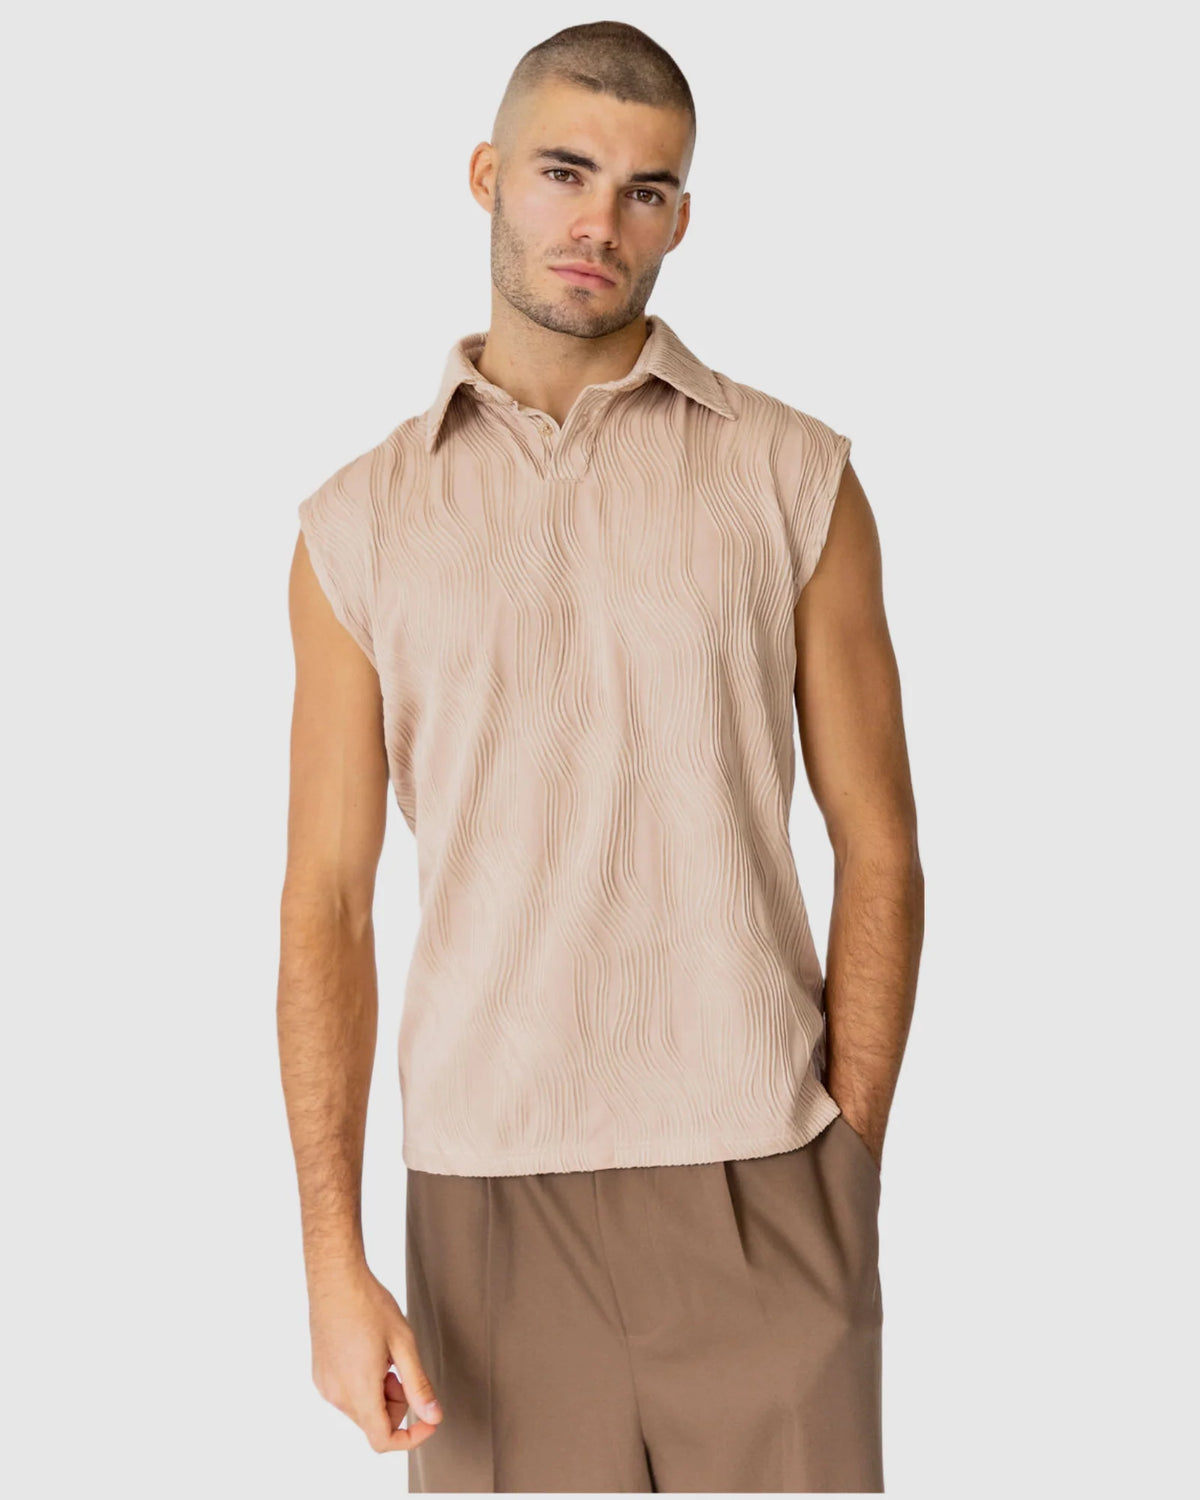 Justin Cassin Verve Sleeveless Shirt in Brown Color